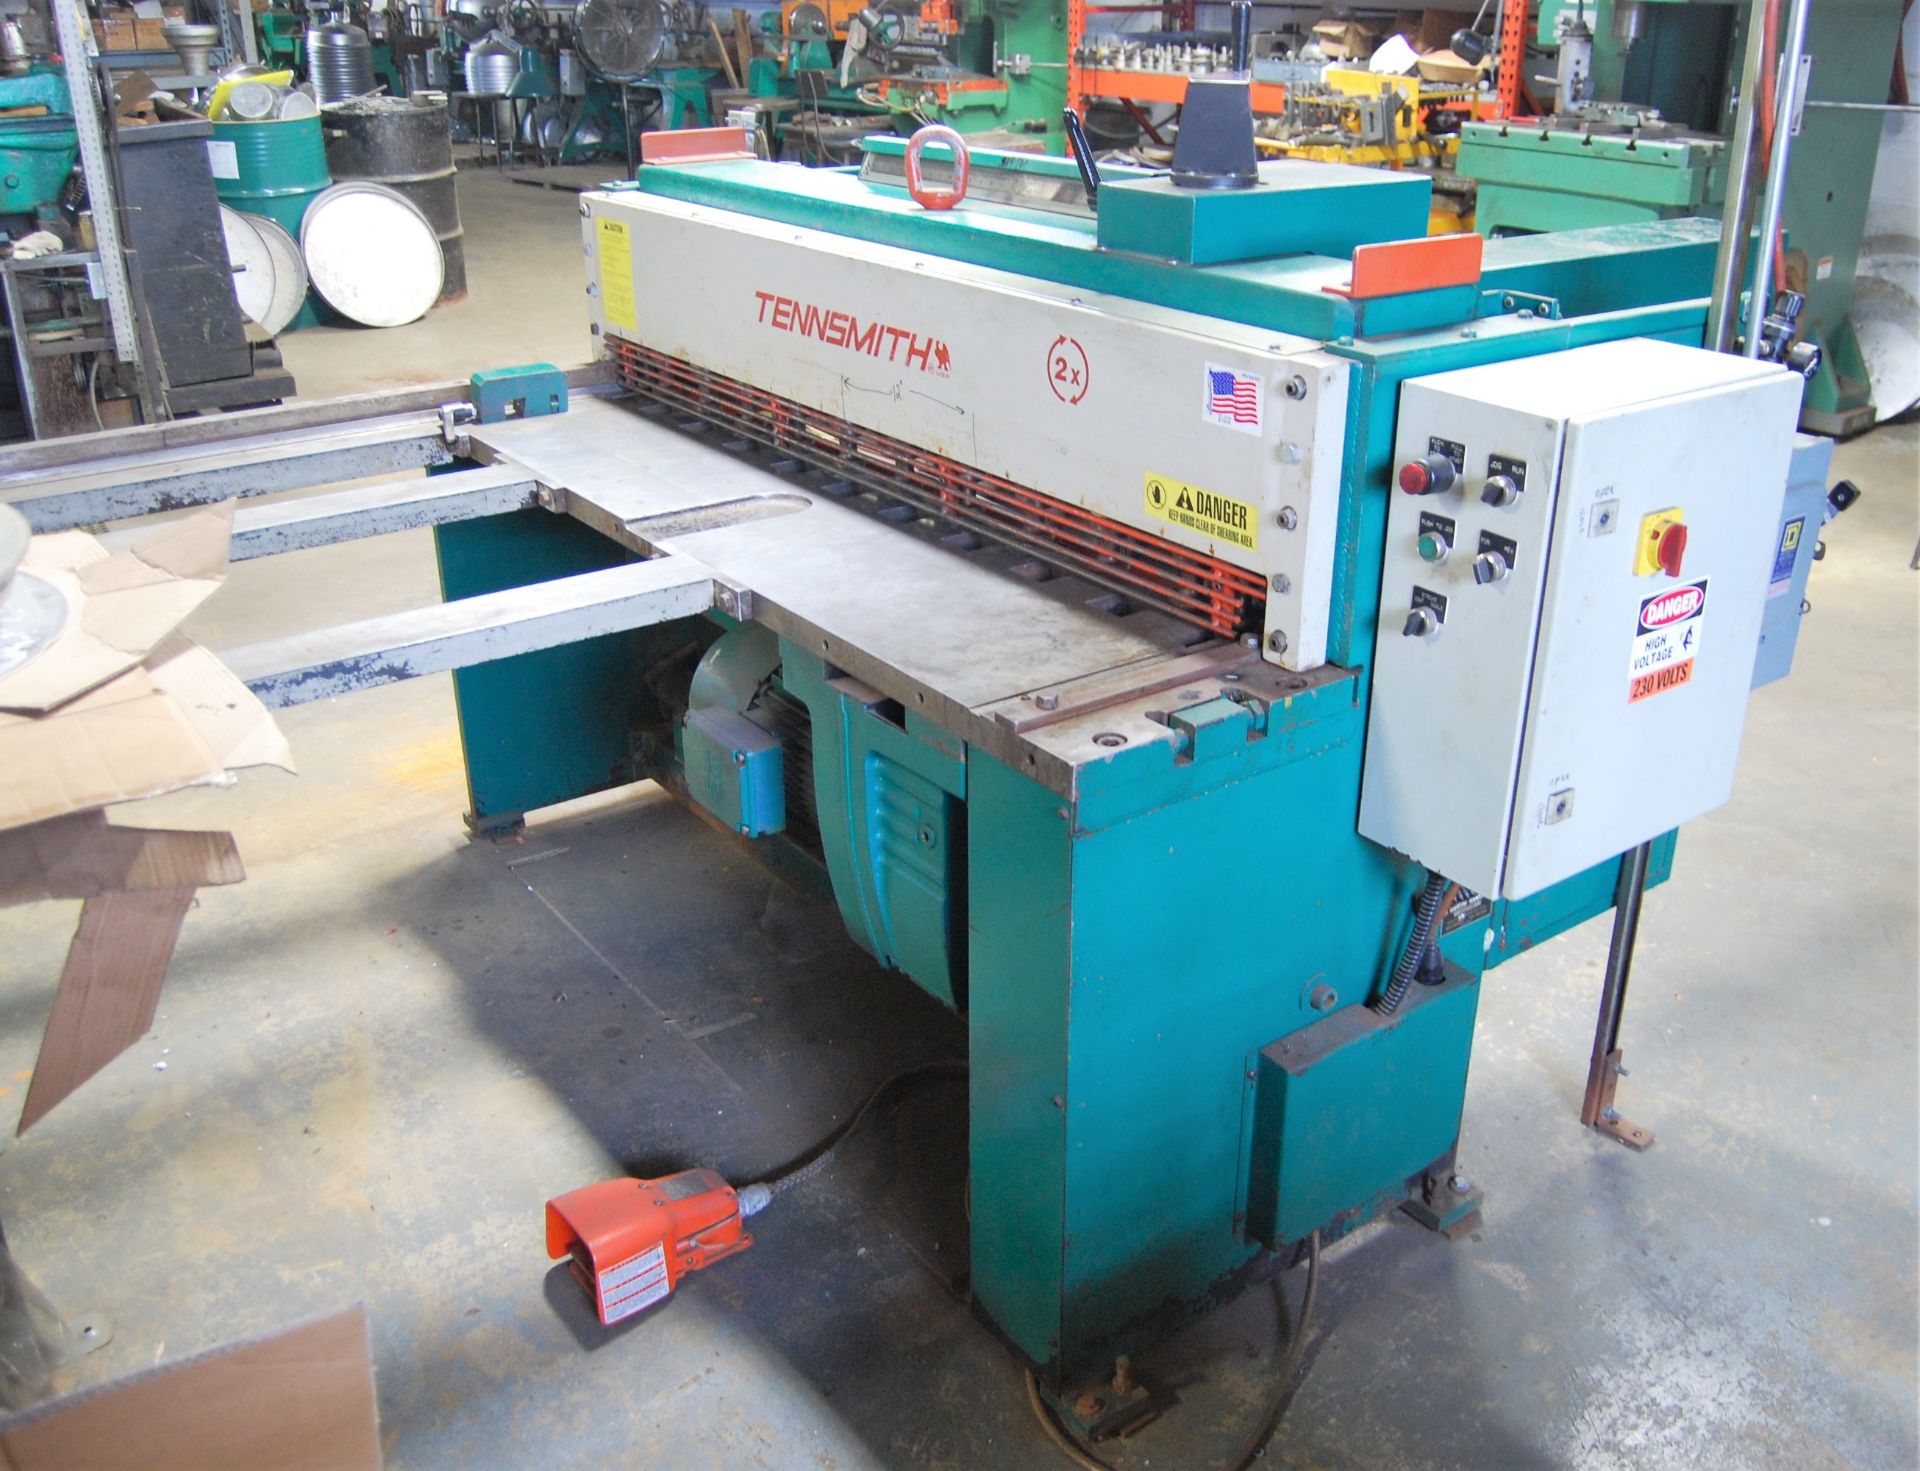 TENNSMITH 5' X 10 GAGE MDL. LM510 POWER SHEAR, WITH 24" FRONT OPERATED MANUAL BACK GAGE, (2) FRONT